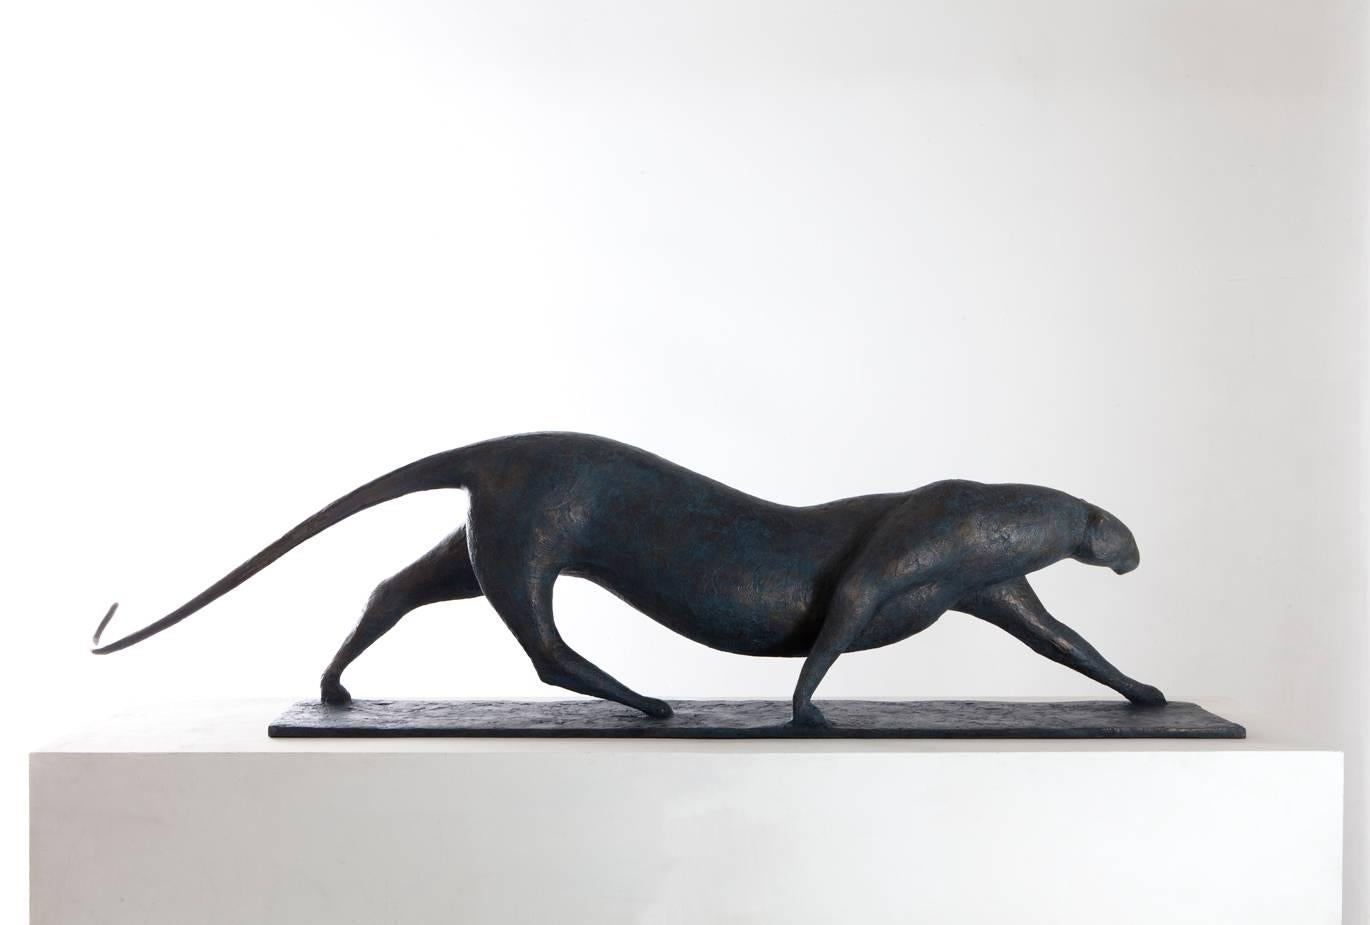 Large Feline is a bronze sculpture by French contemporary artist Pierre Yermia, dimensions are 24 × 175 × 47 cm (9.4 × 68.9 × 18.5 in). 
The sculpture is signed and numbered, it is part of a limited edition of 8 editions + 4 artist’s proofs, and